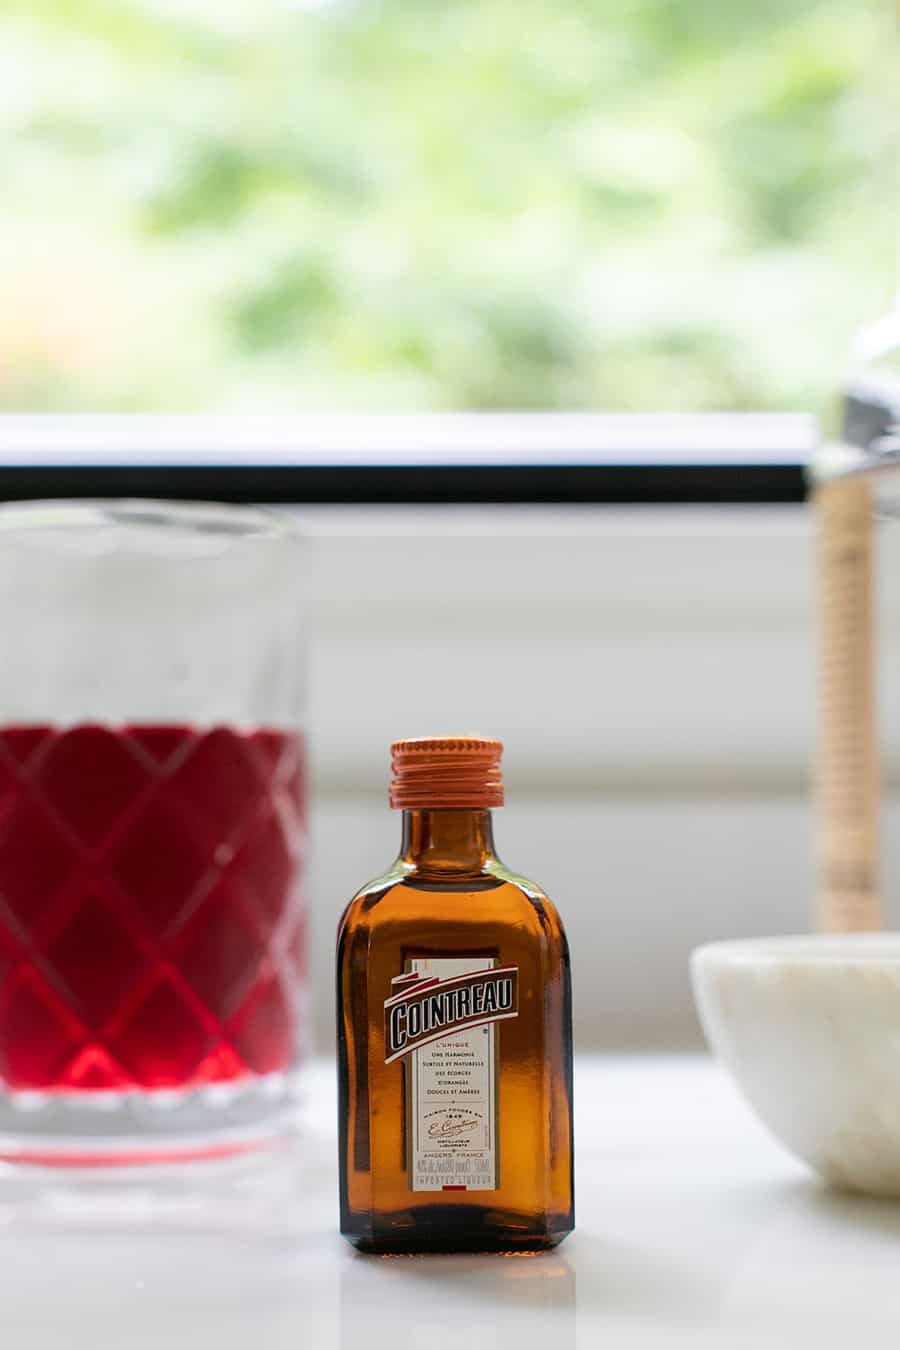 Small bottles Cointreau - sweetened cranberry juice